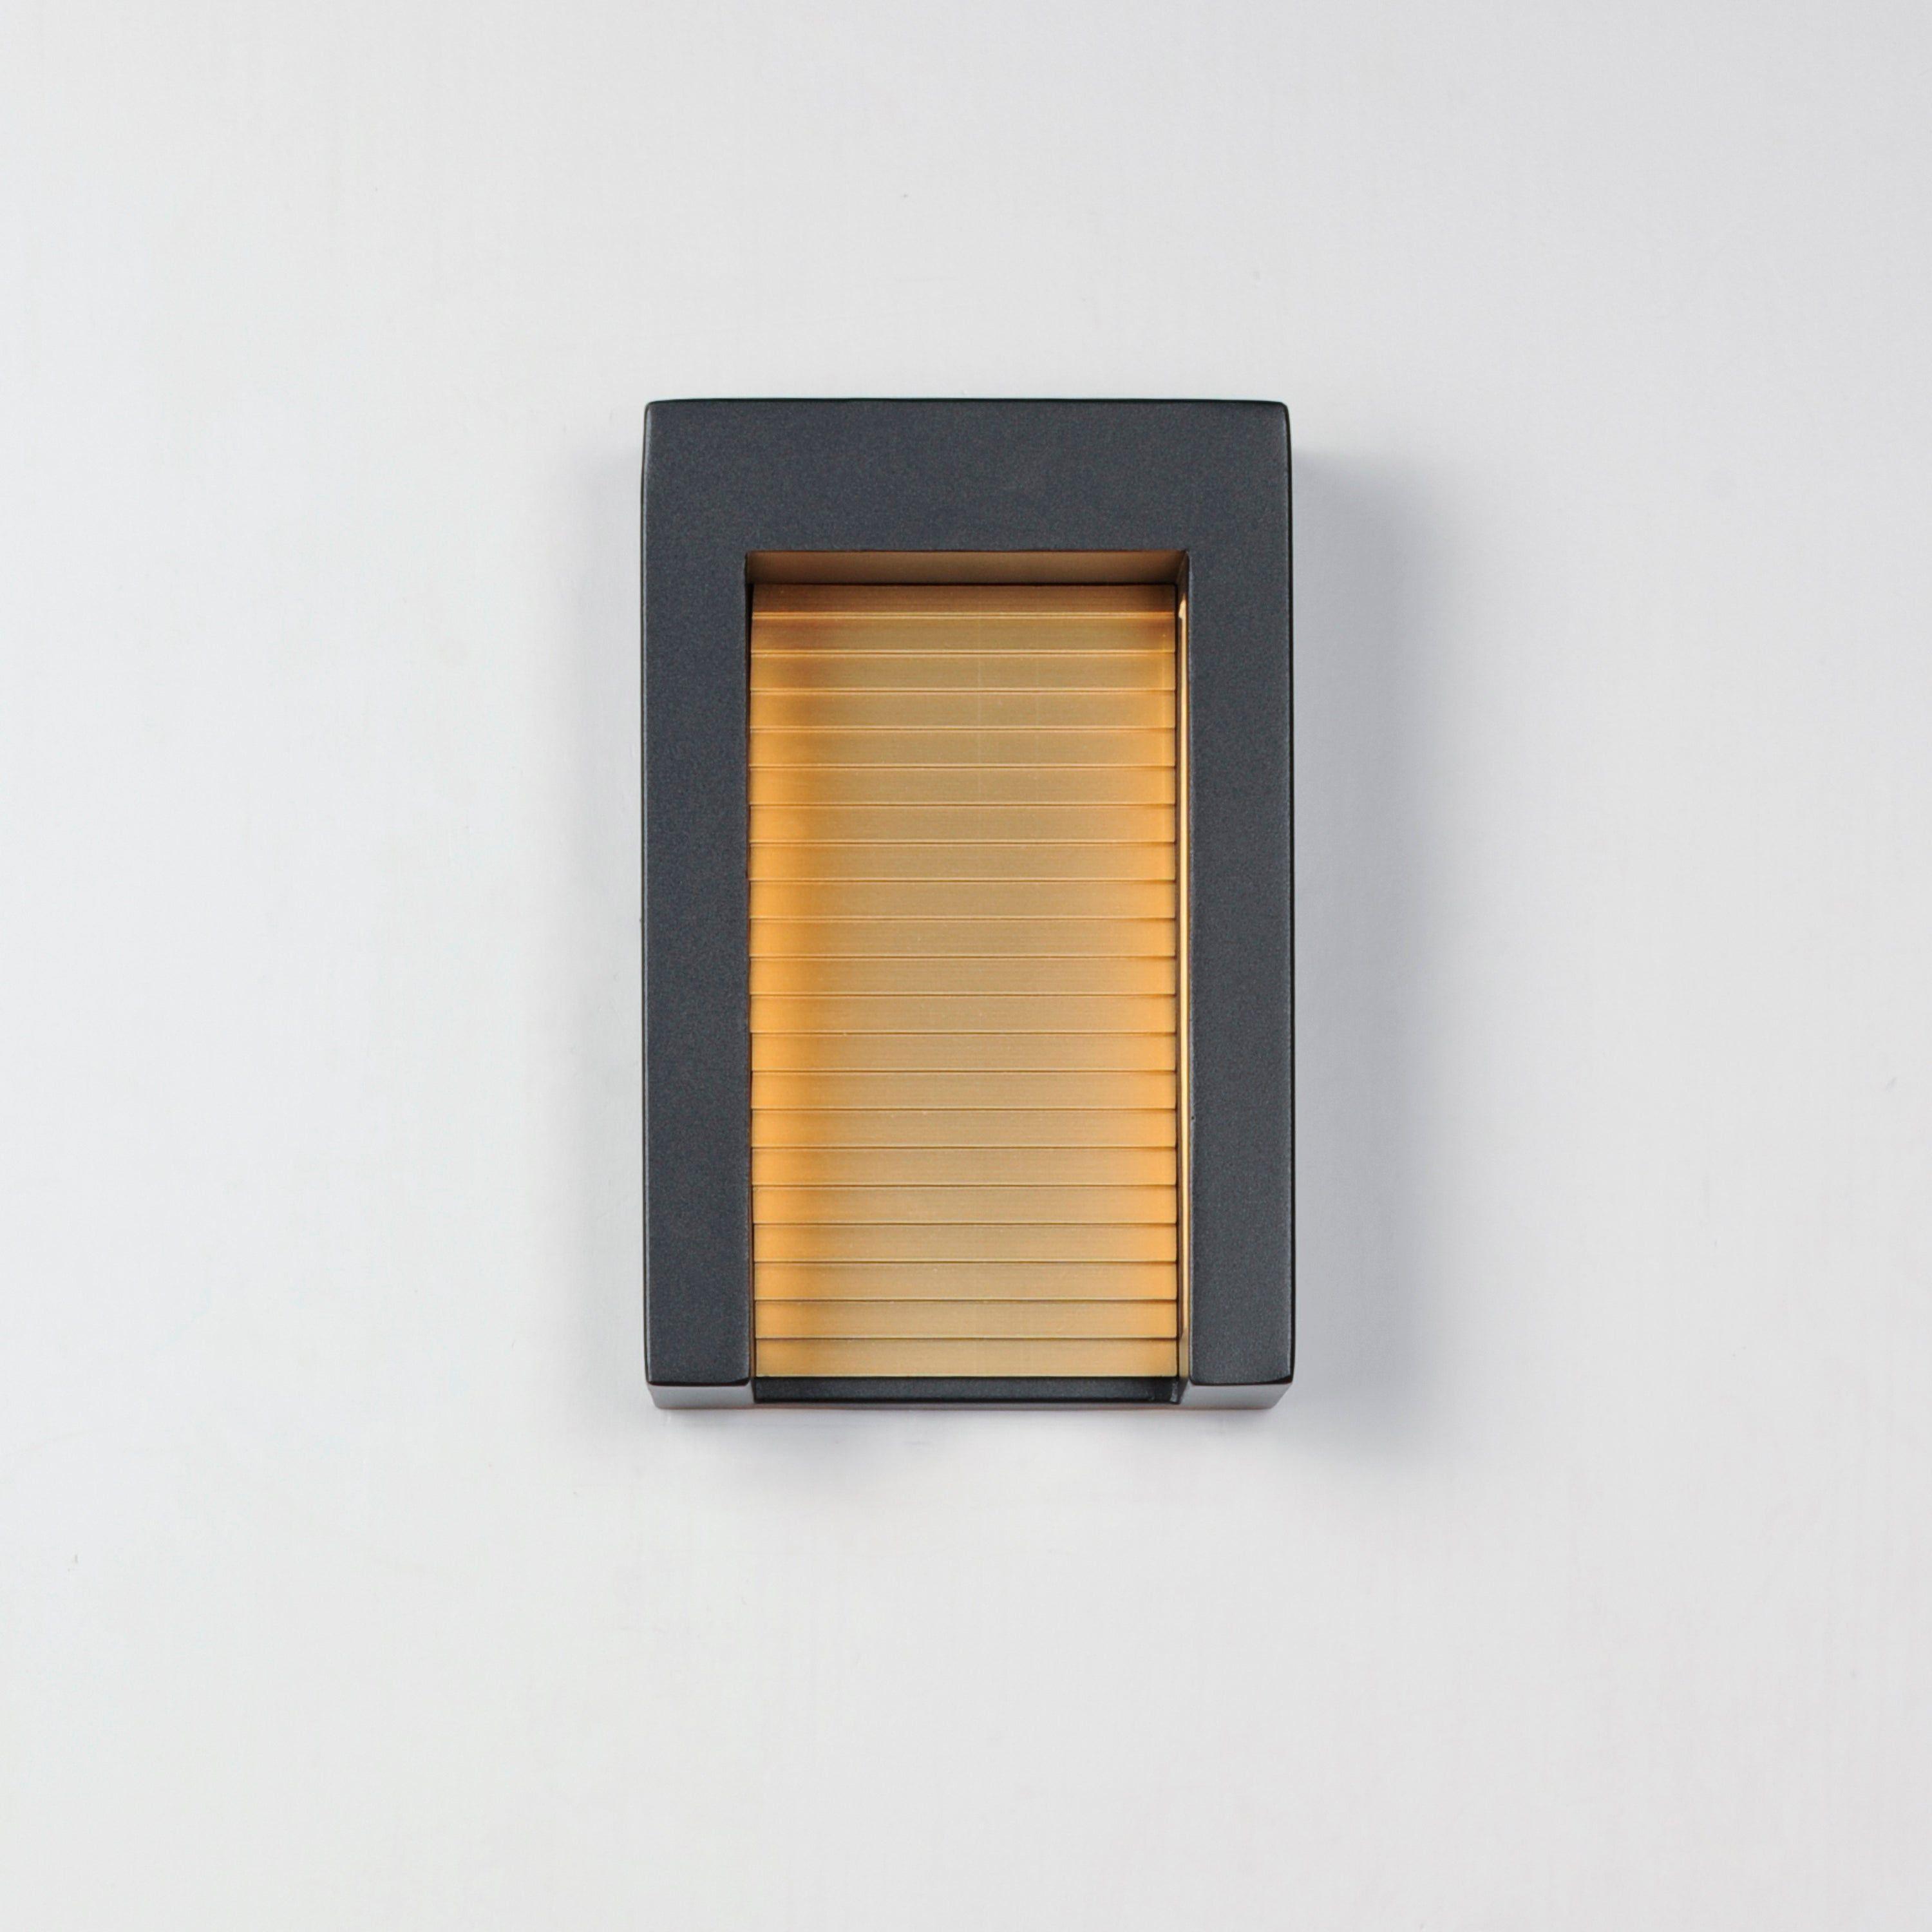 ET2 - Alcove Small LED Outdoor Wall Light - Lights Canada